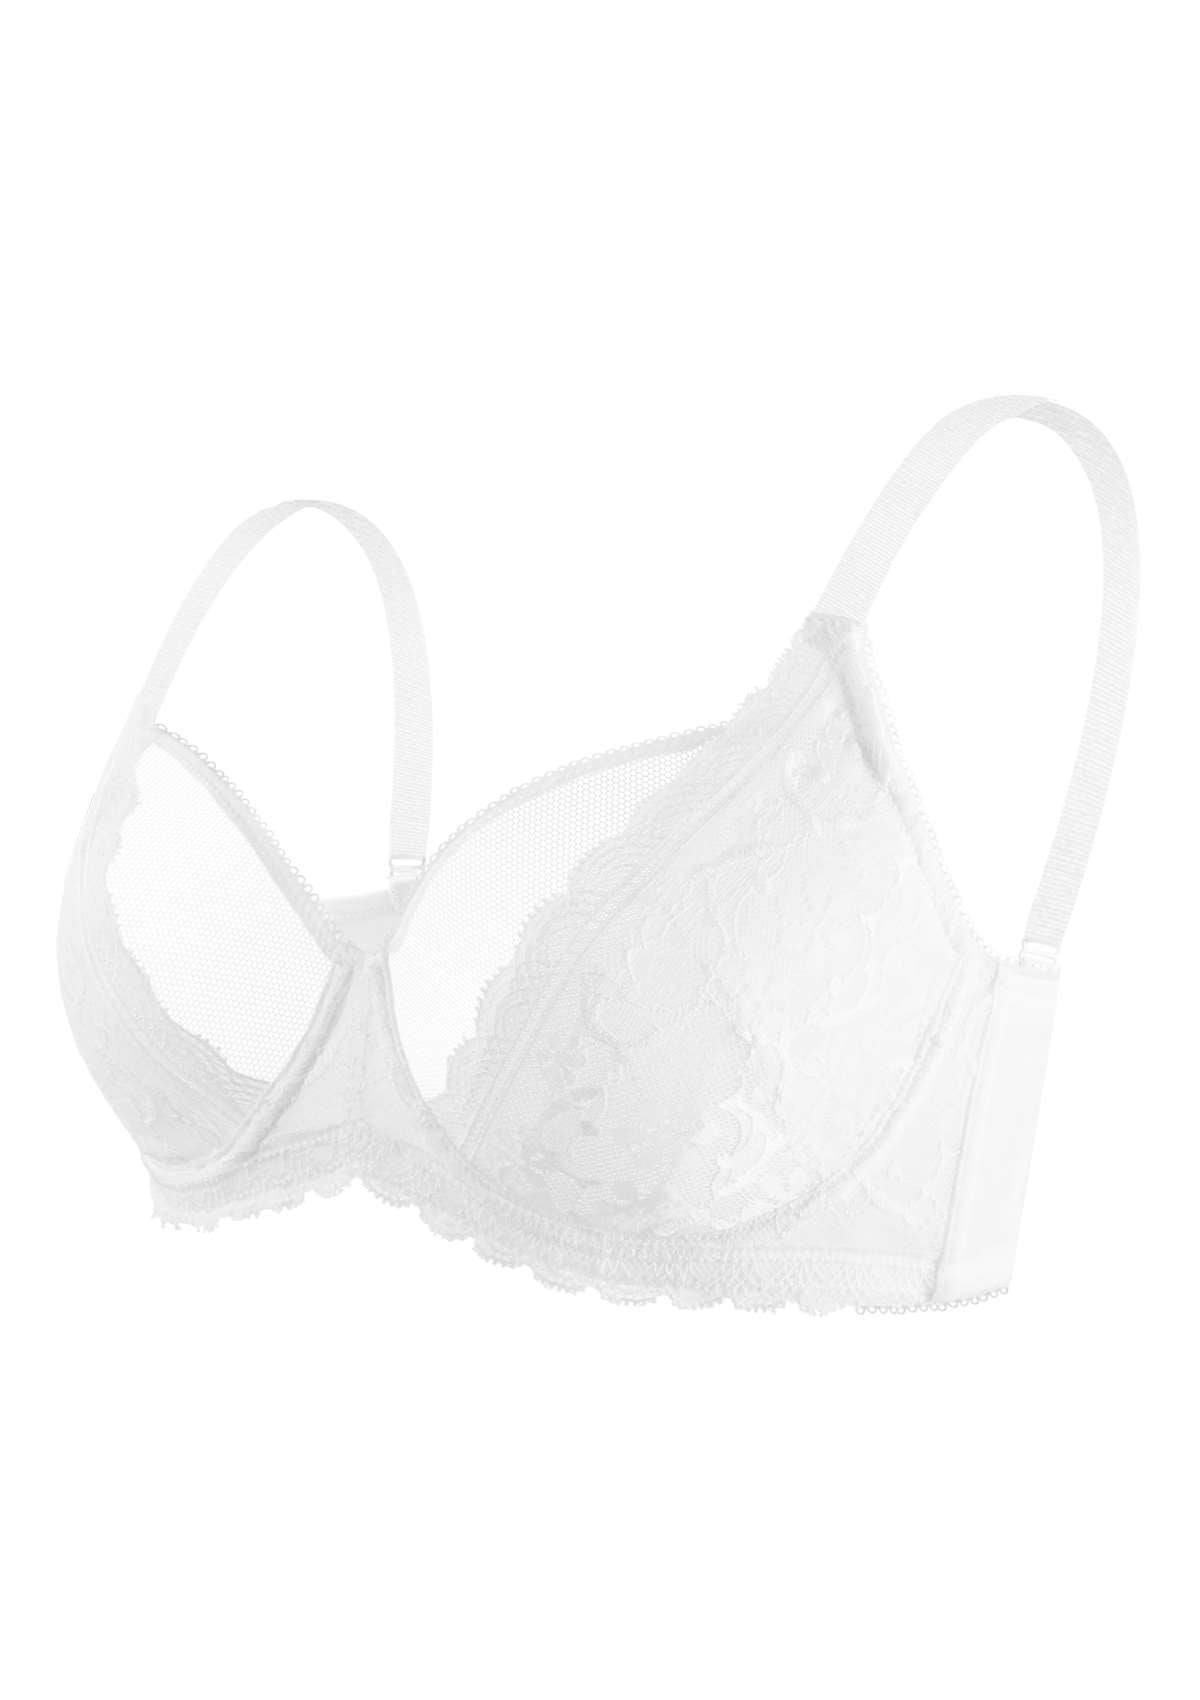 HSIA Anemone Big Bra: Best Bra For Lift And Support, Floral Bra - White / 38 / C